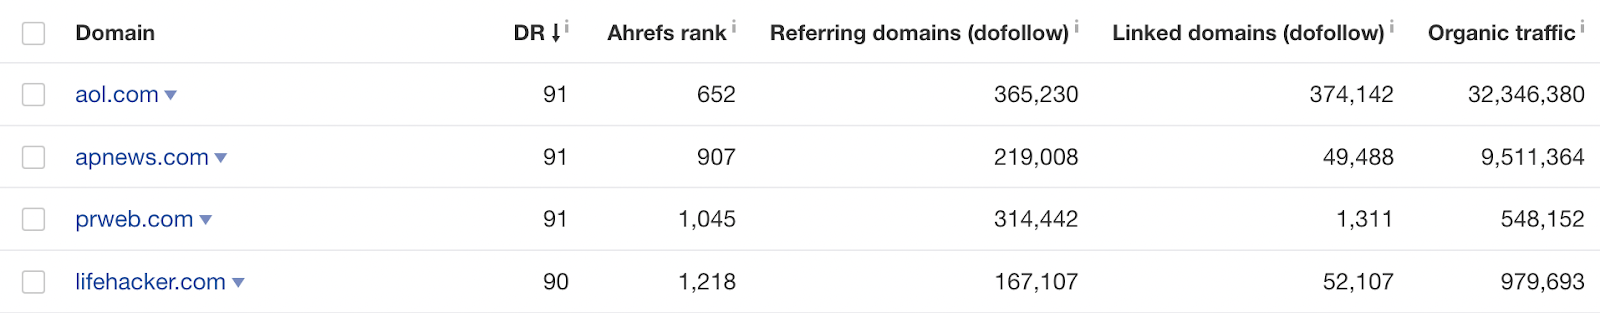 List of domains with corresponding data like DR, Ahrefs Rank, etc 